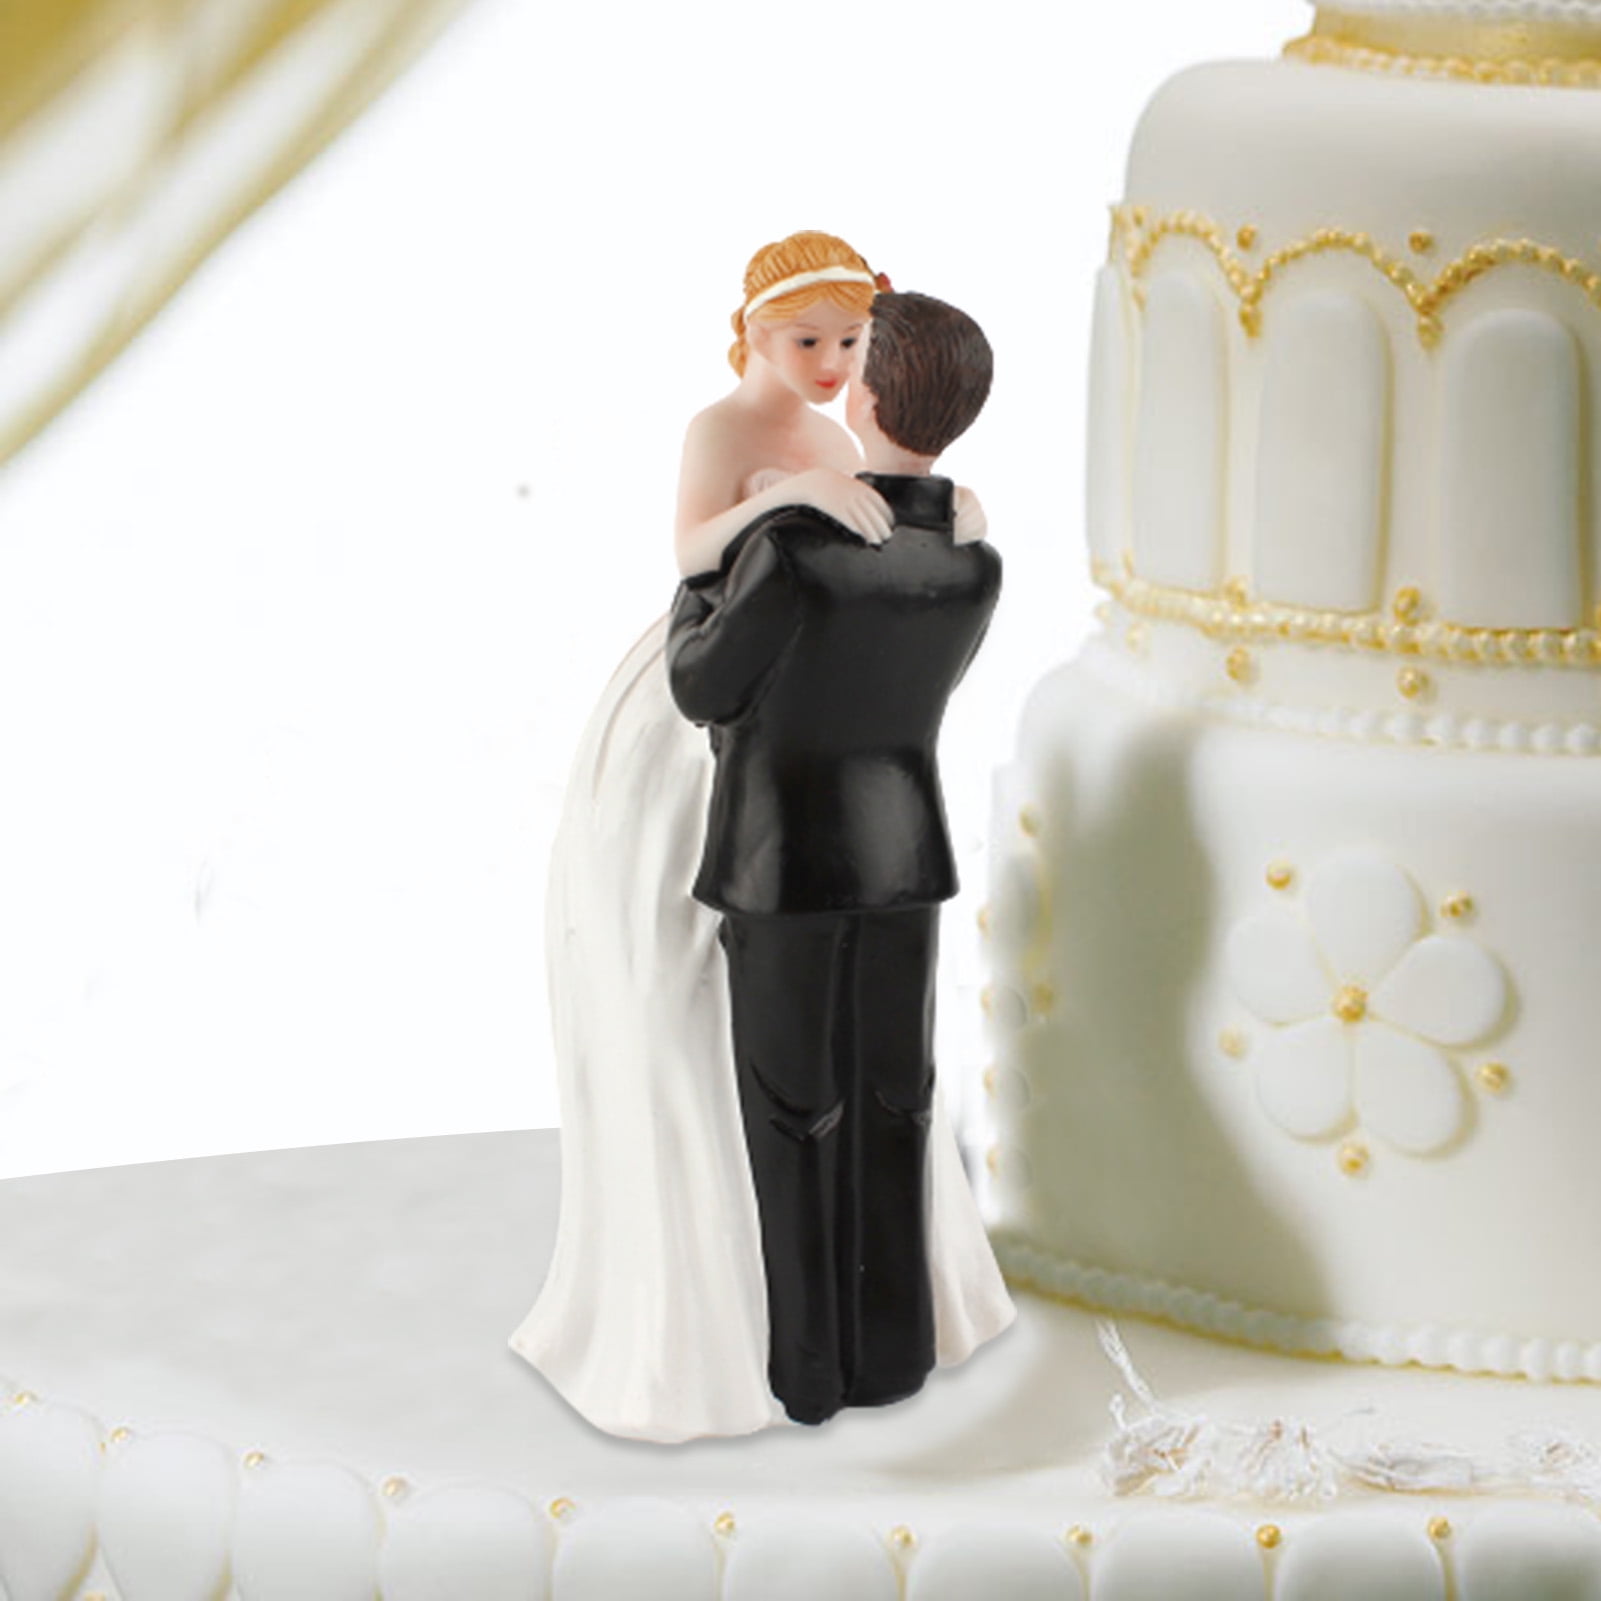 Details about   "Now I Have You" Bride Dragging Groom Humorous Funny Wedding Cake Topper RRP 28£ 